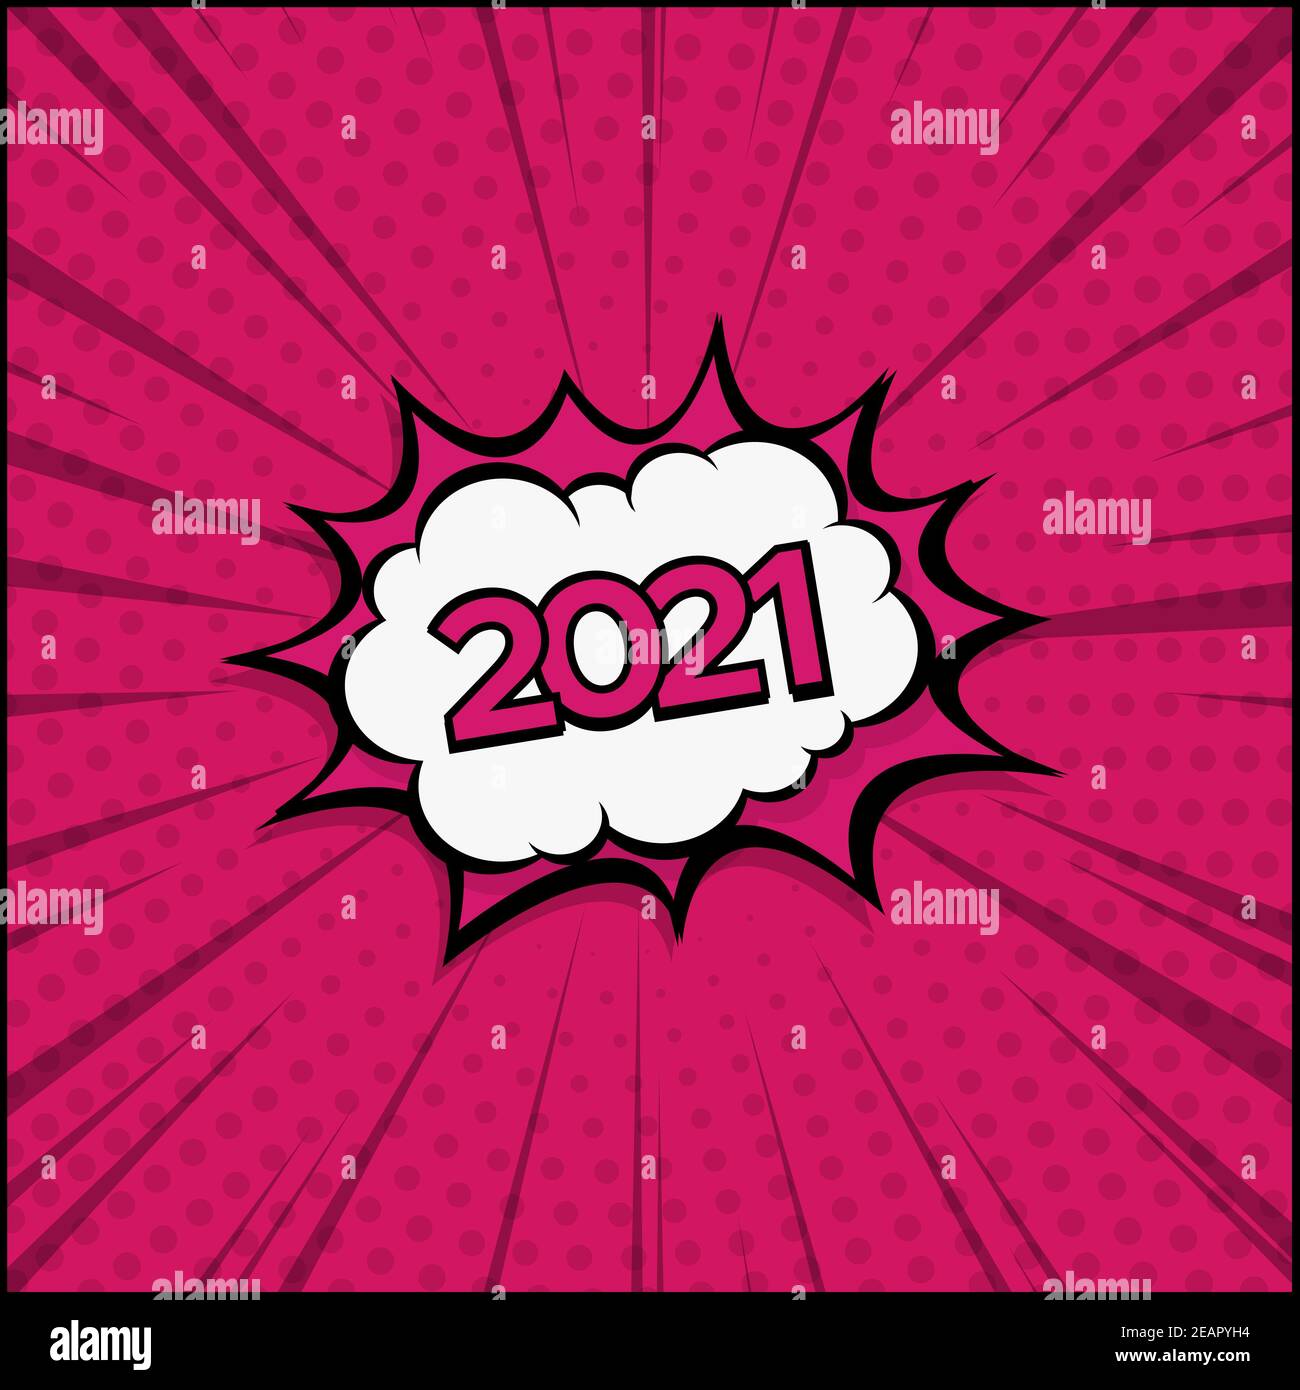 Colorful Comic Zoom New Year 2021- Vector illustration Stock Photo